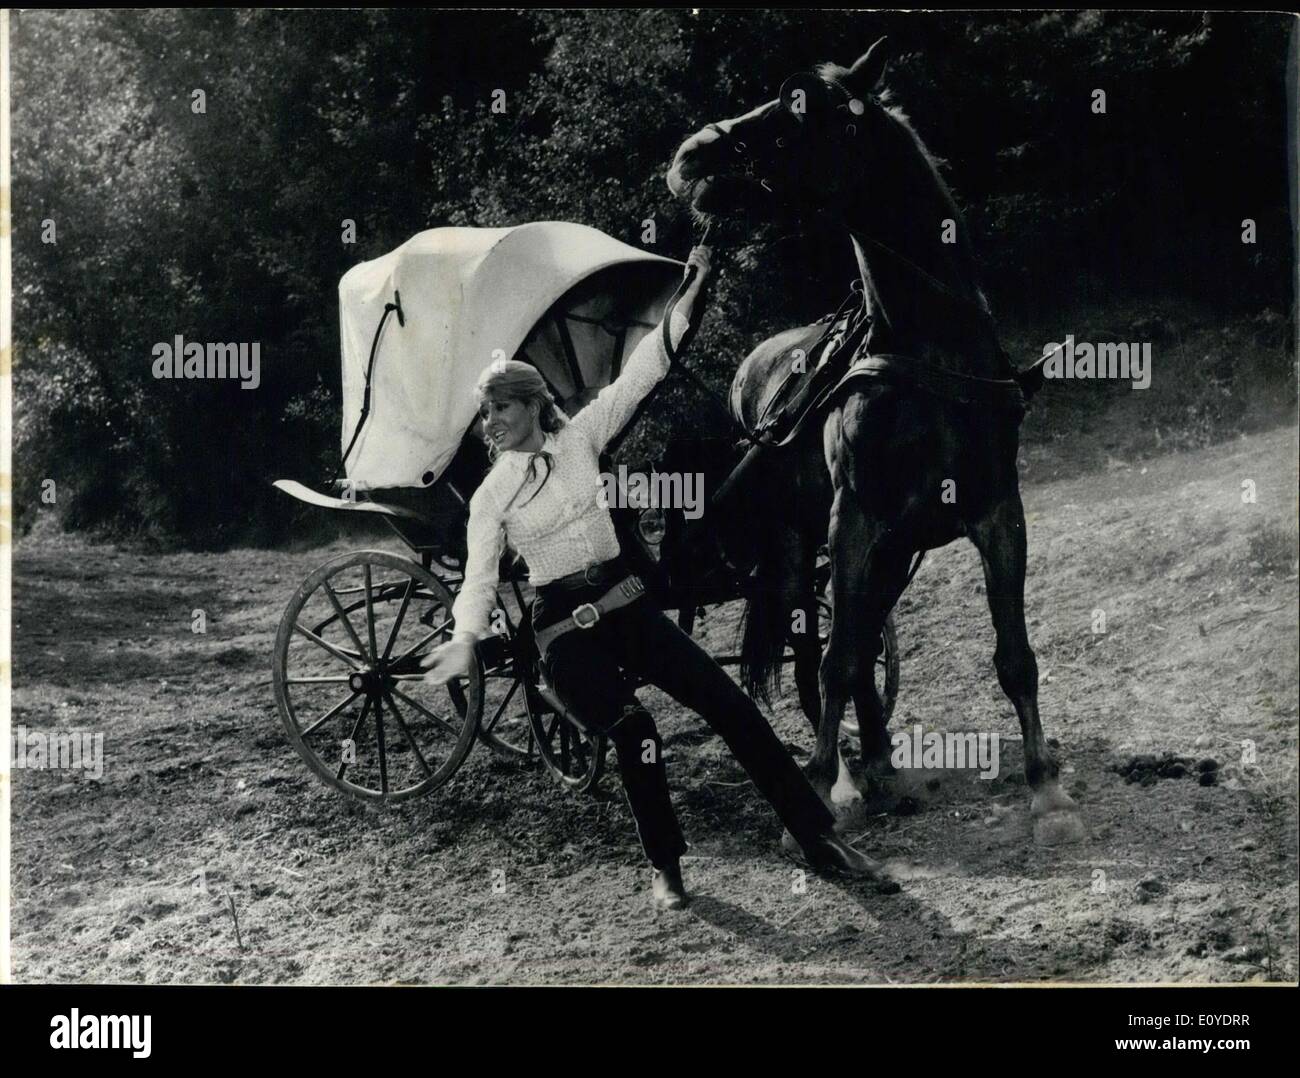 Dec. 20, 1969 - The movie was being directed by Jean Girault. The horse, who had a role in the movie, was spooked during filming and Girault have to calm him down. Stock Photo